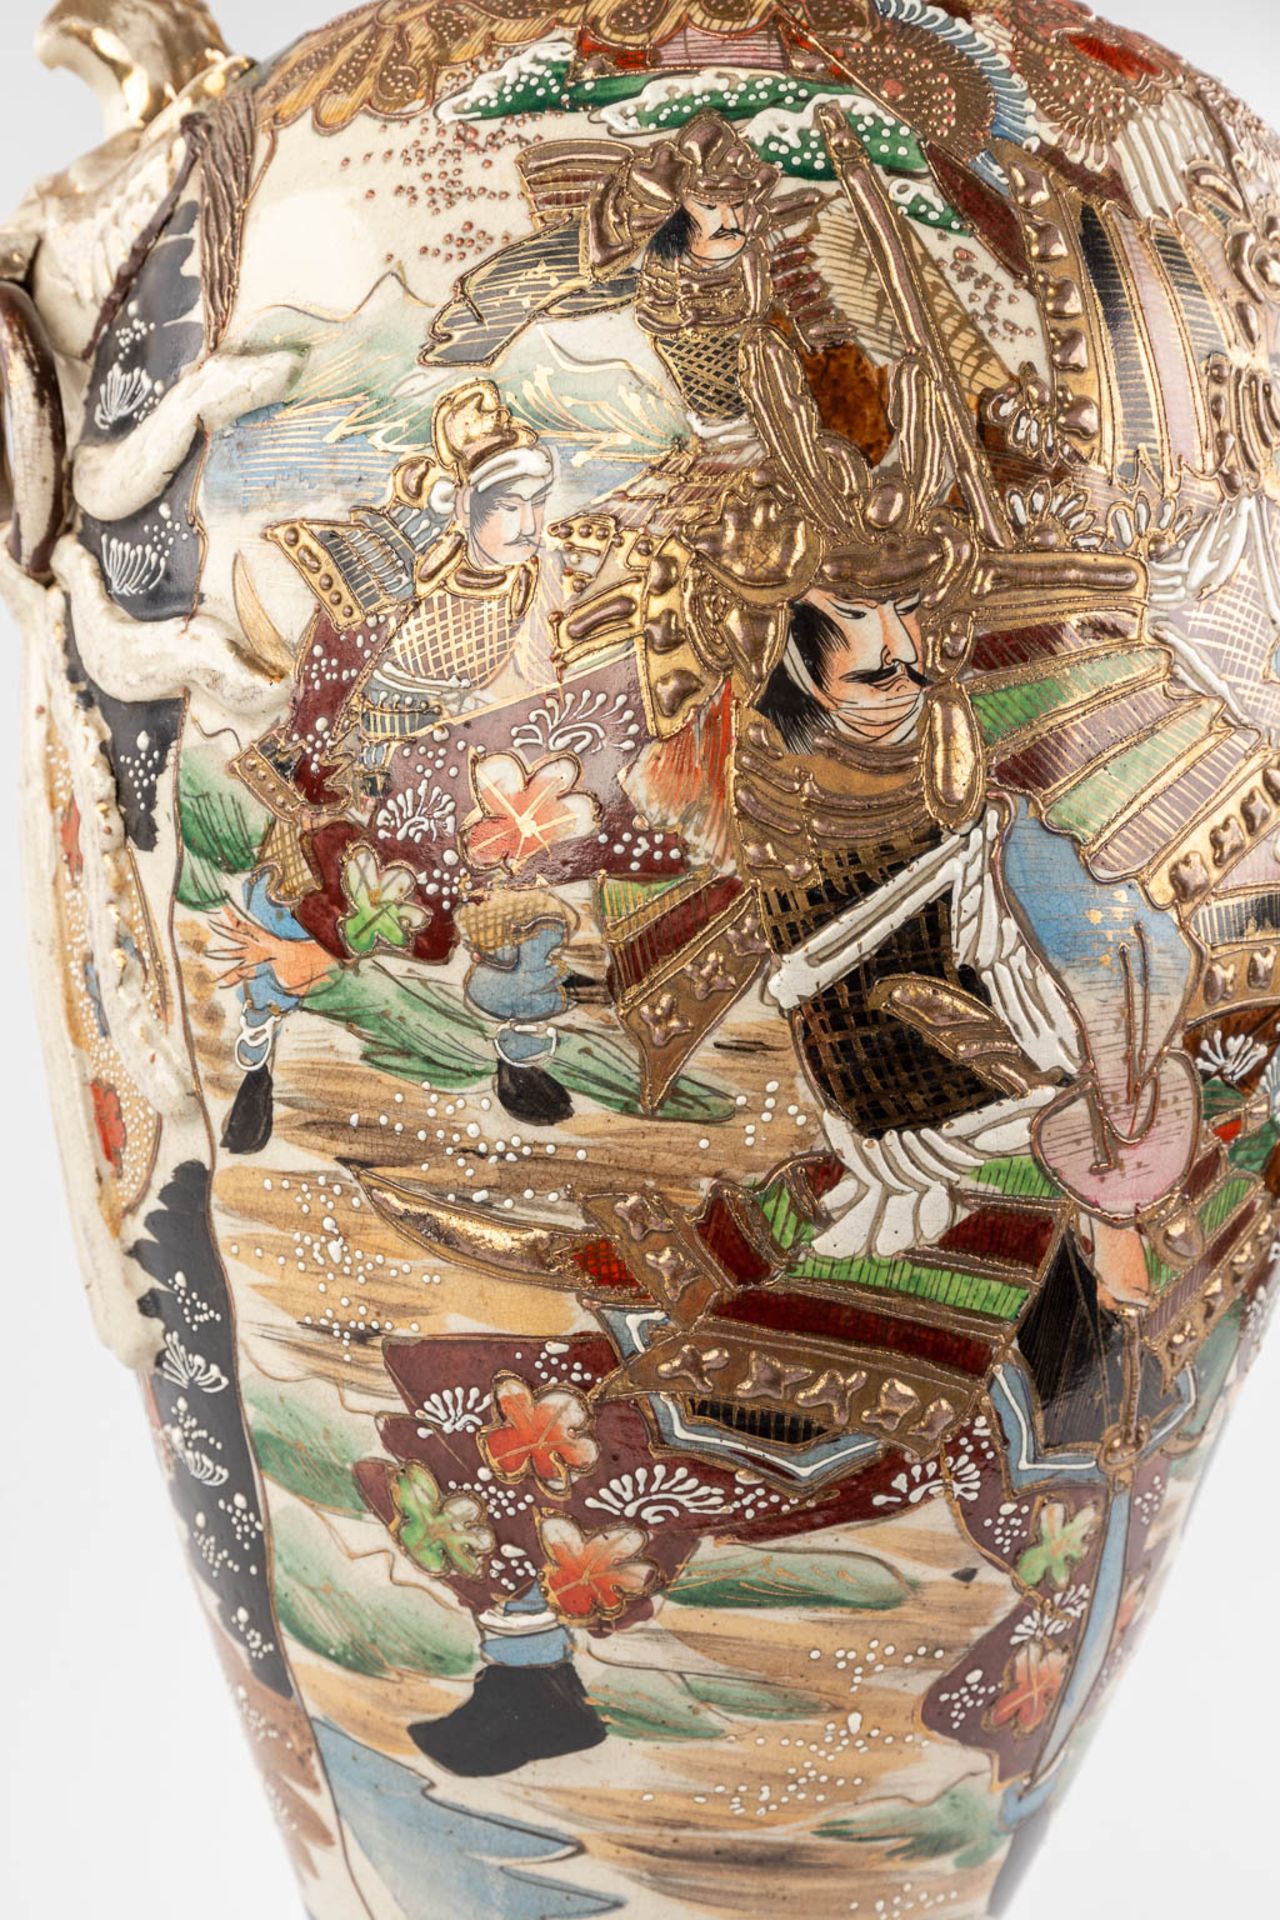 A large and decorative Japanese Satsuma vase. 20th C. (H:80 x D:32 cm) - Image 13 of 16